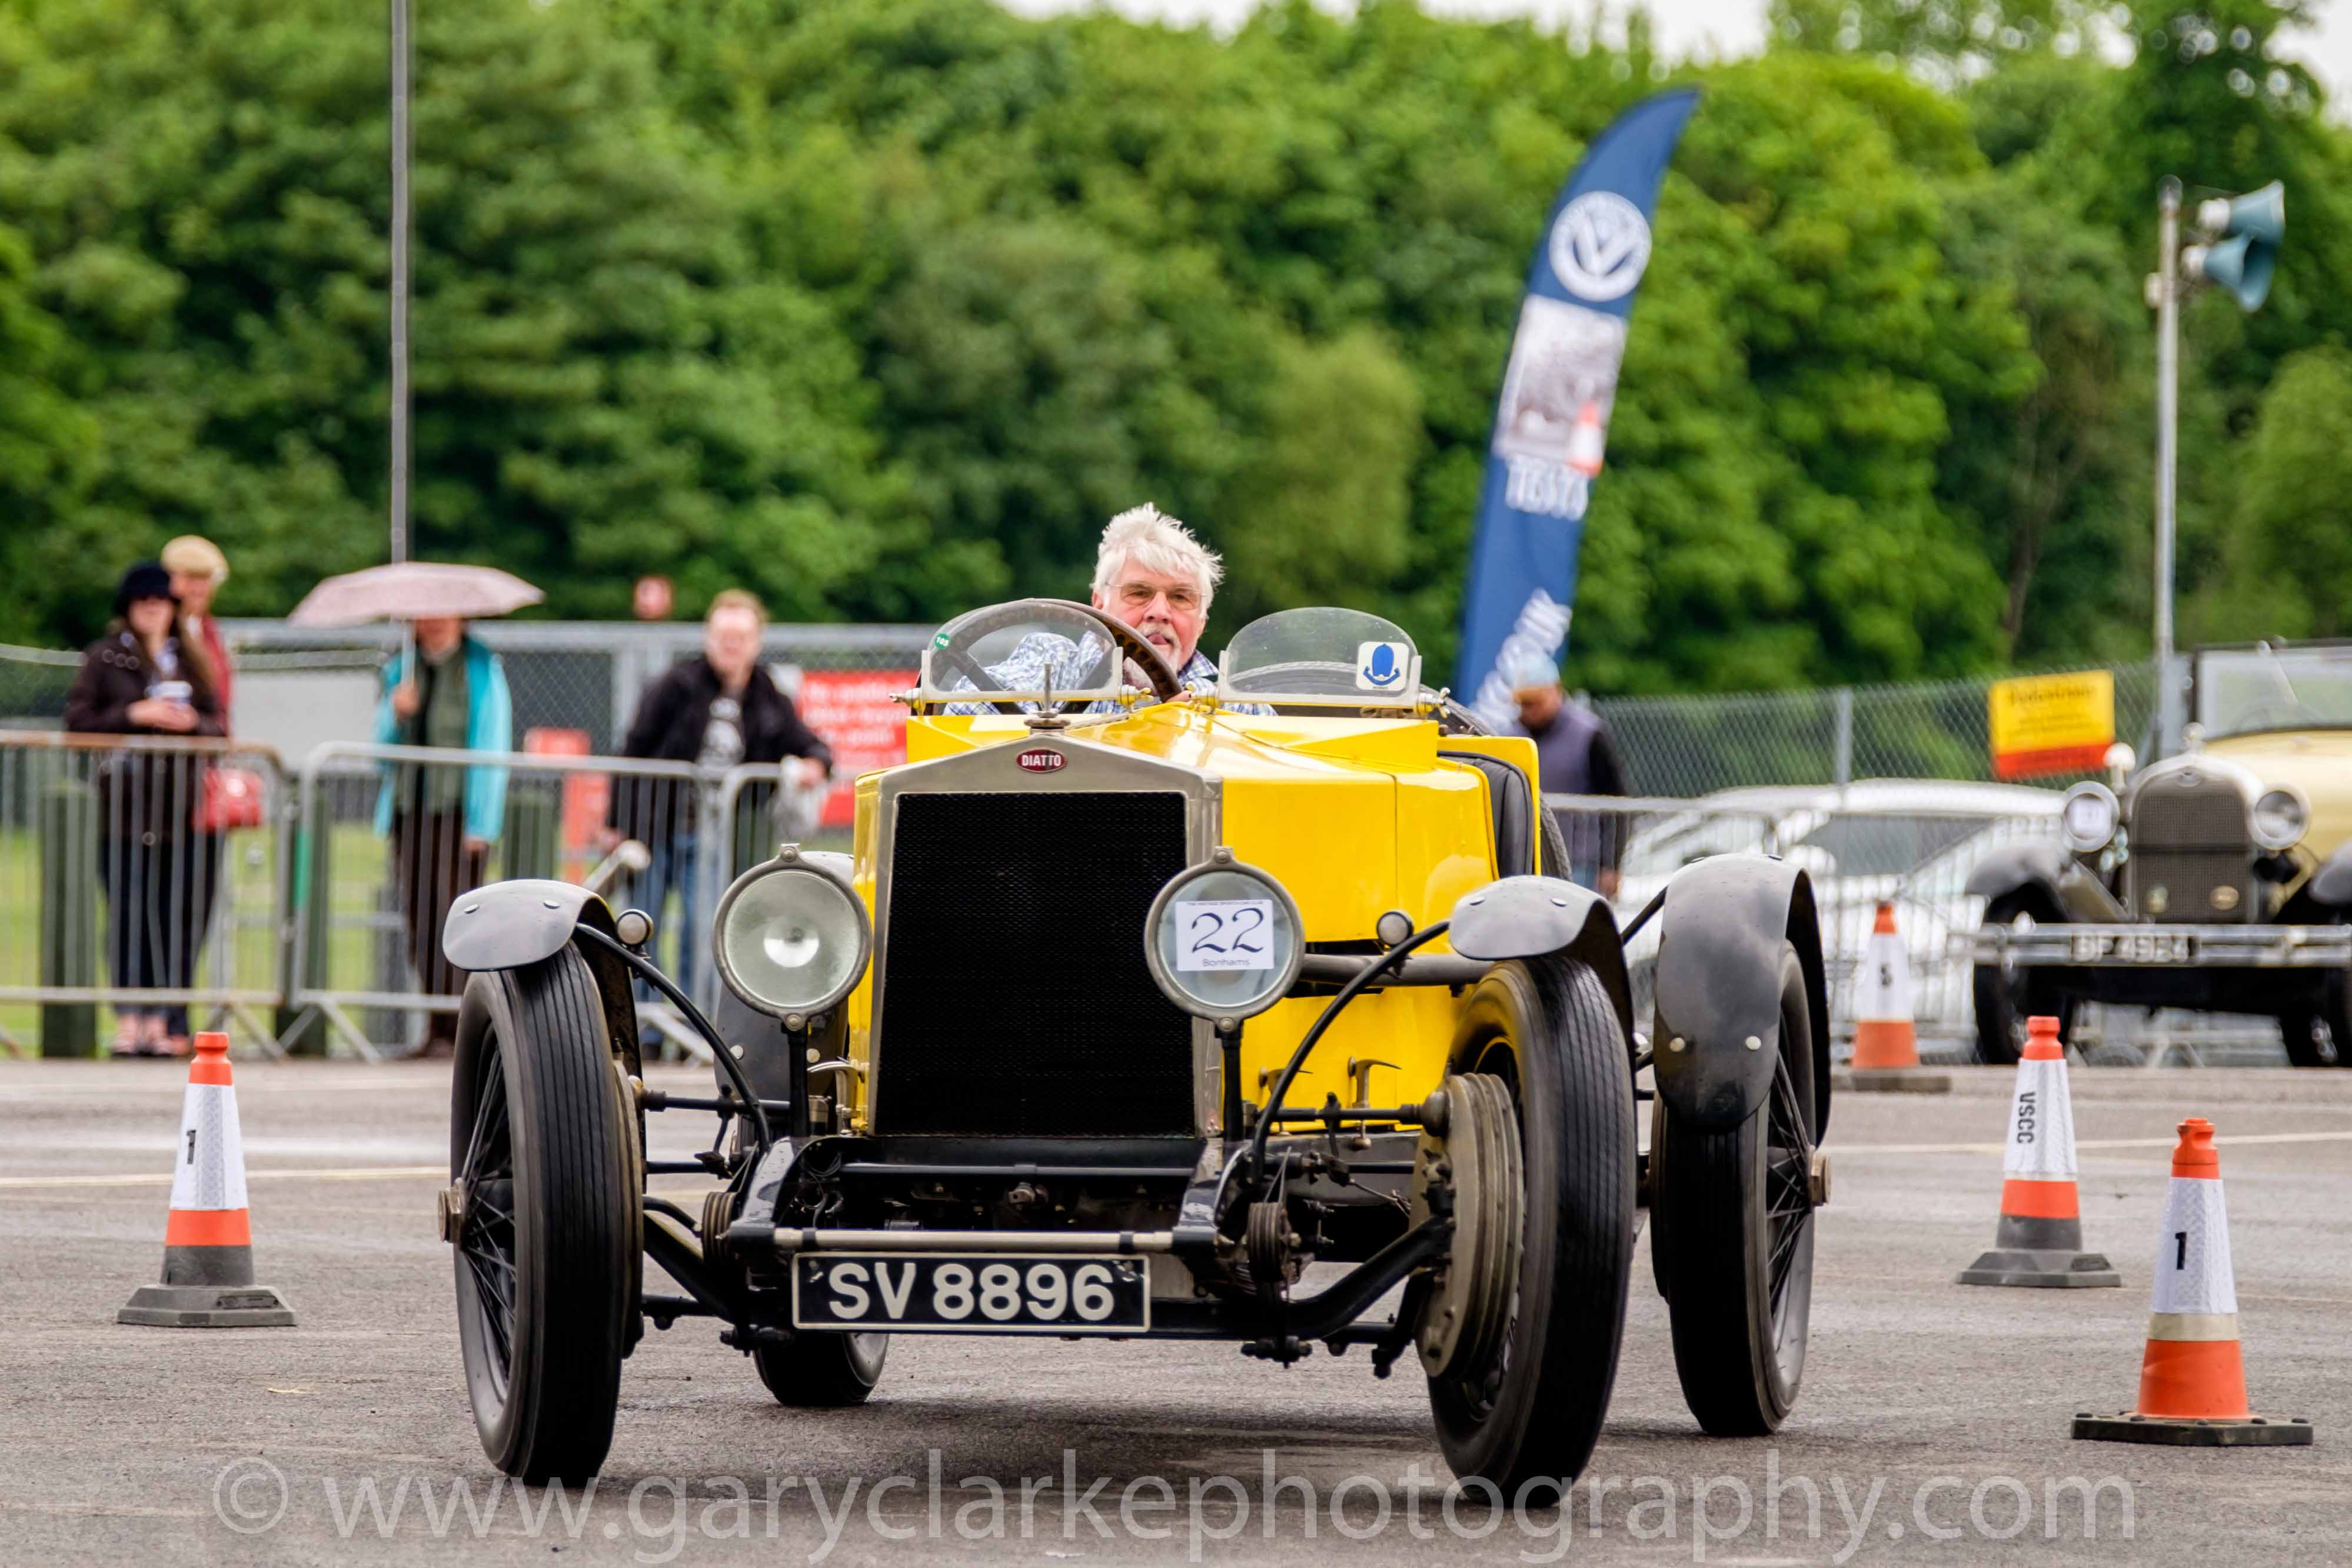 VSCC AutoSolo and Concours events join Formula Vintage programme at Oulton Park - Late Entries Available cover